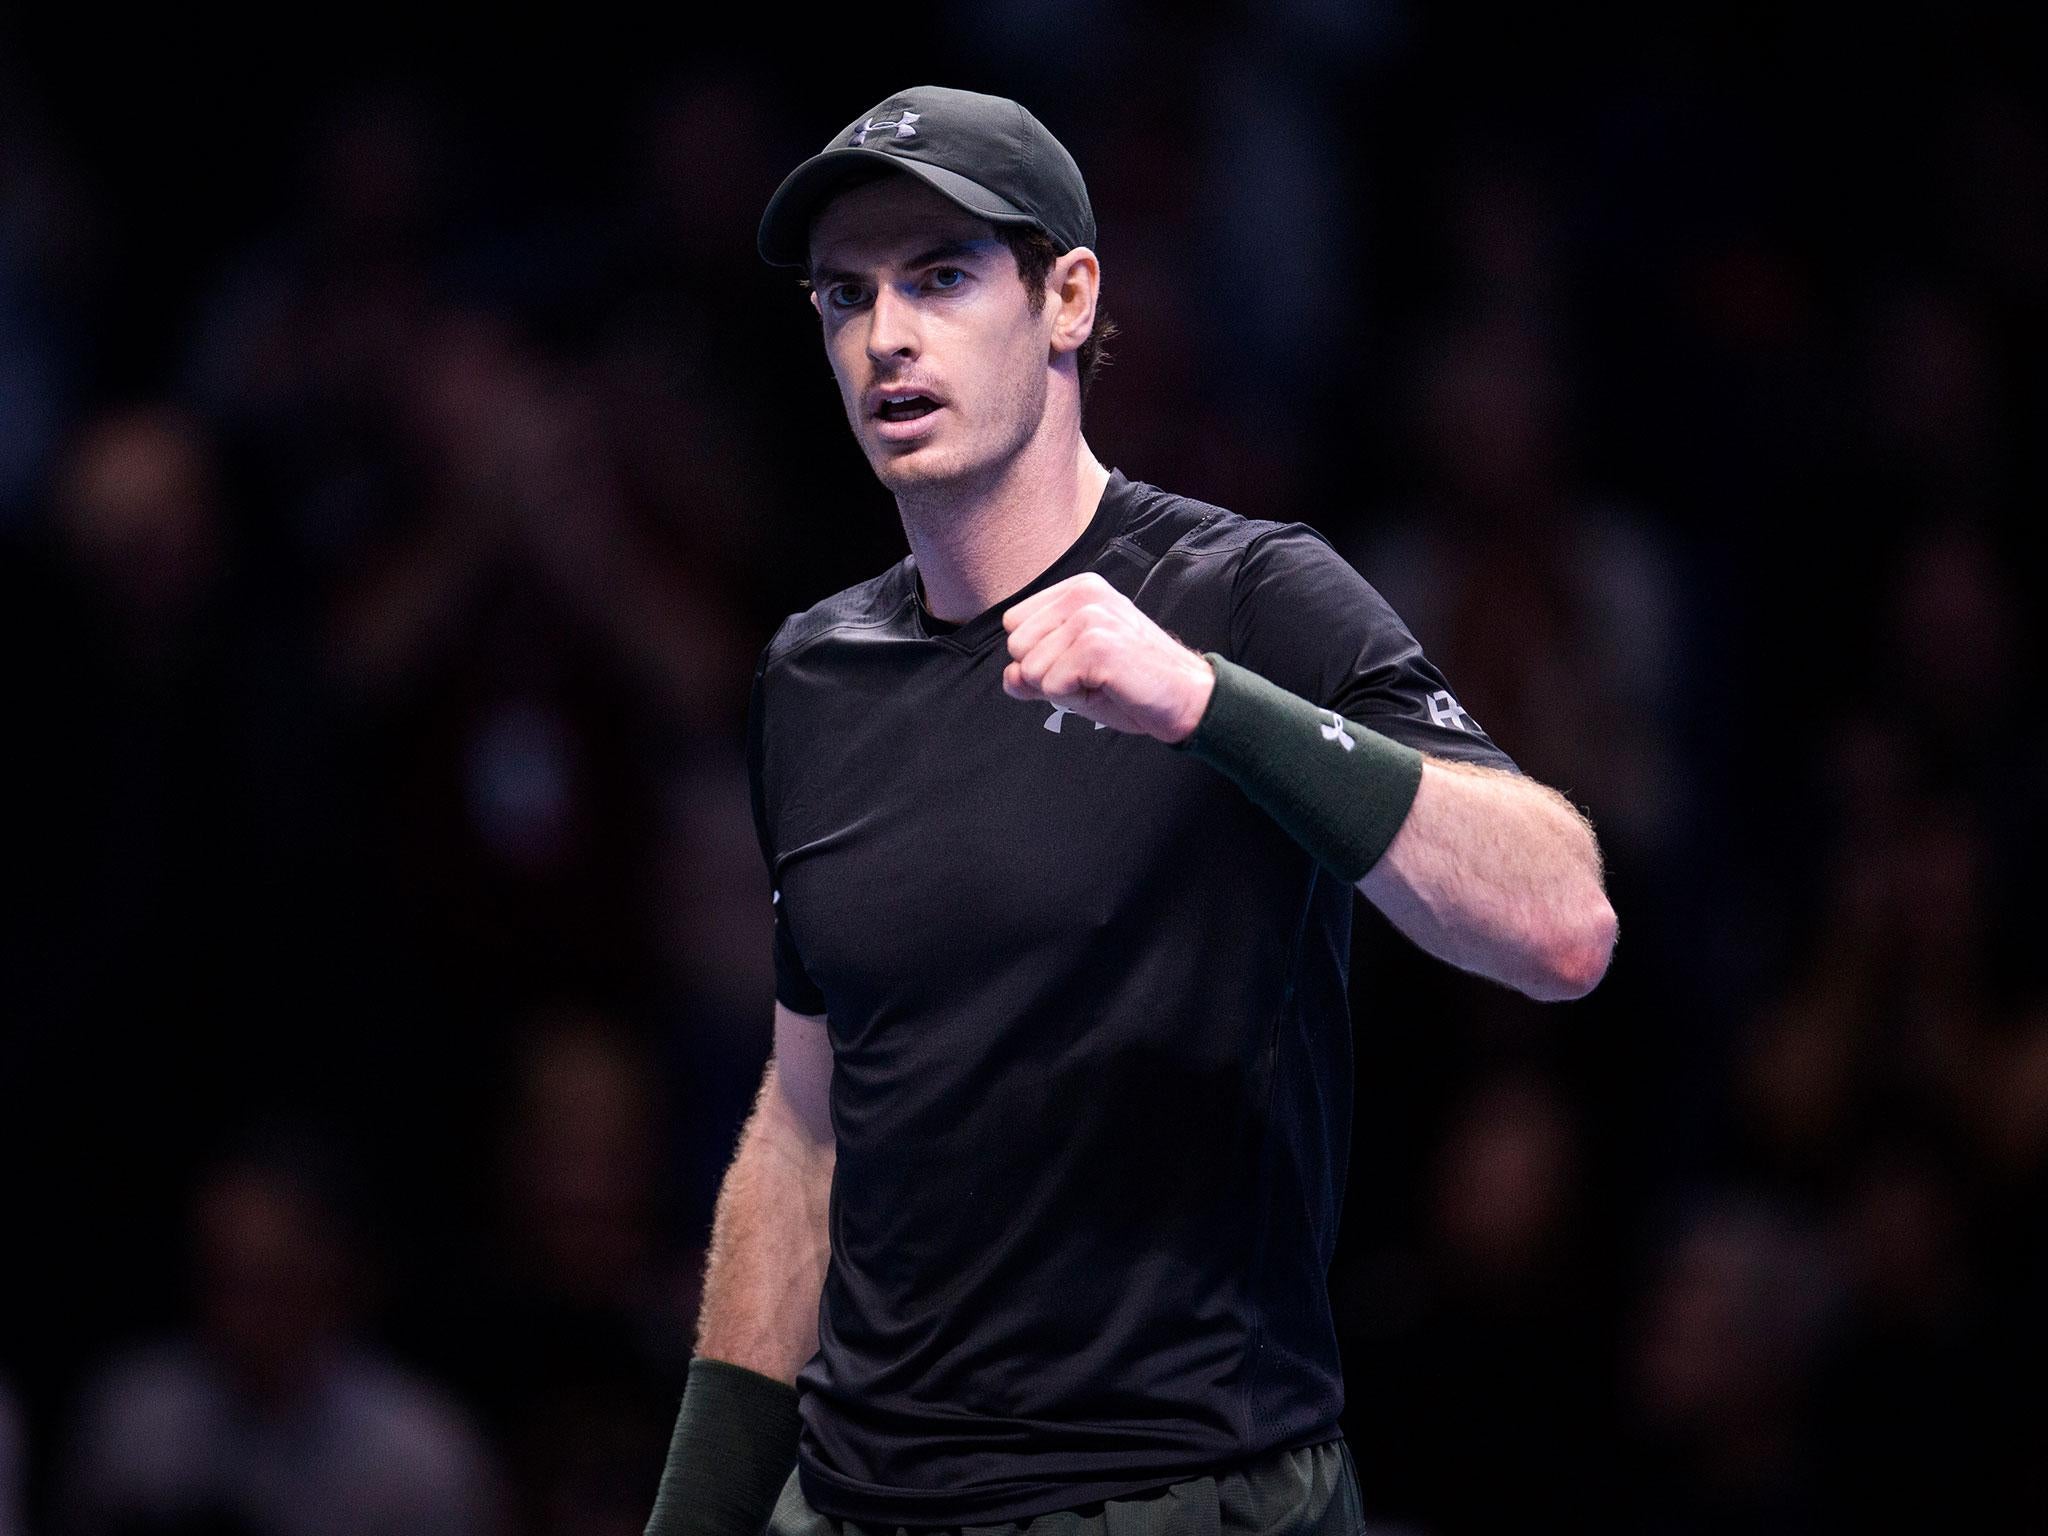 ATP Finals: Andy Murray dreaming of a 'perfect' final against Novak Djokovic in shootout for world No 1 spot - The Independent